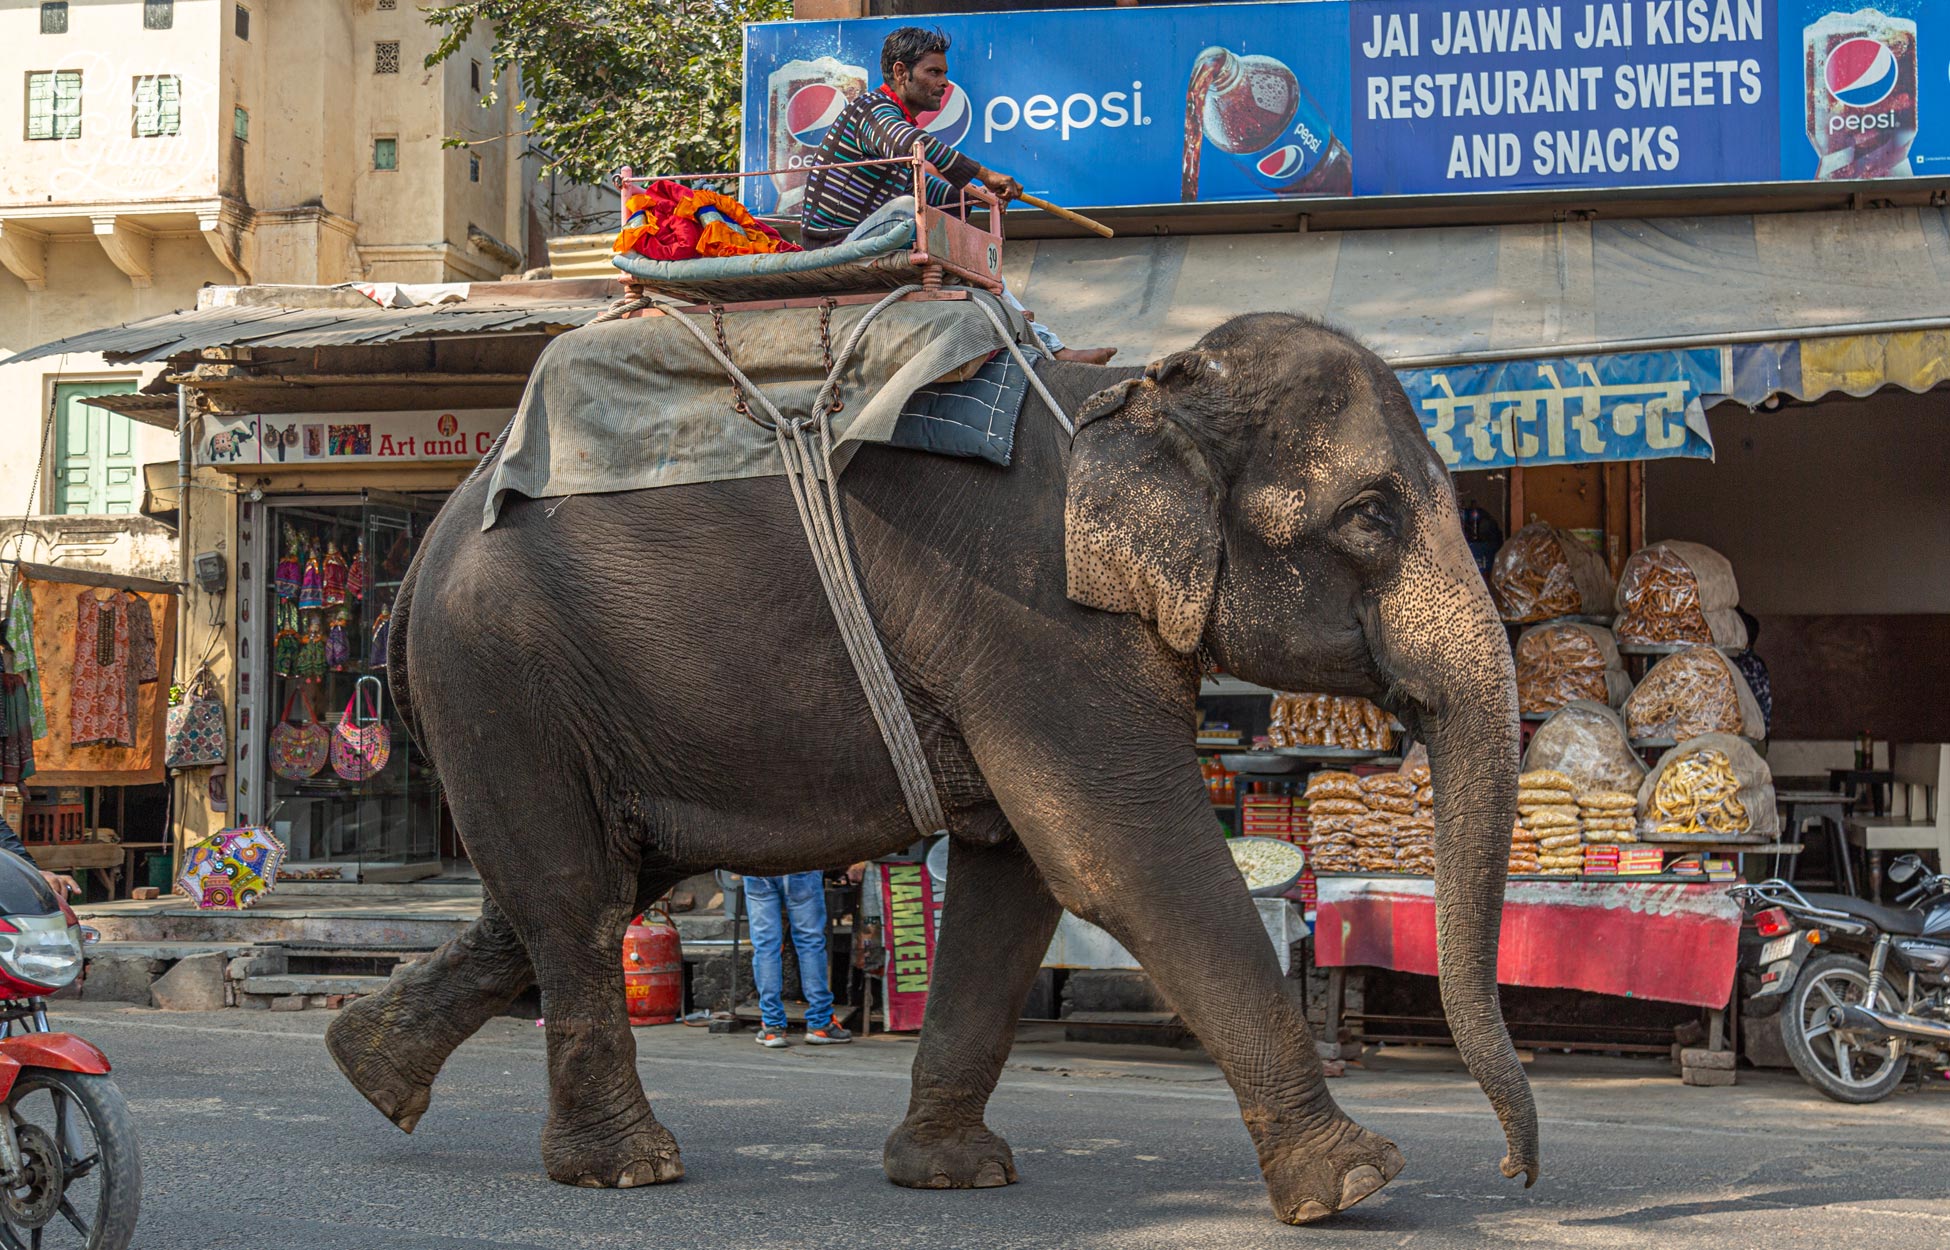 An elephant in the street isn't a sight you see very often!